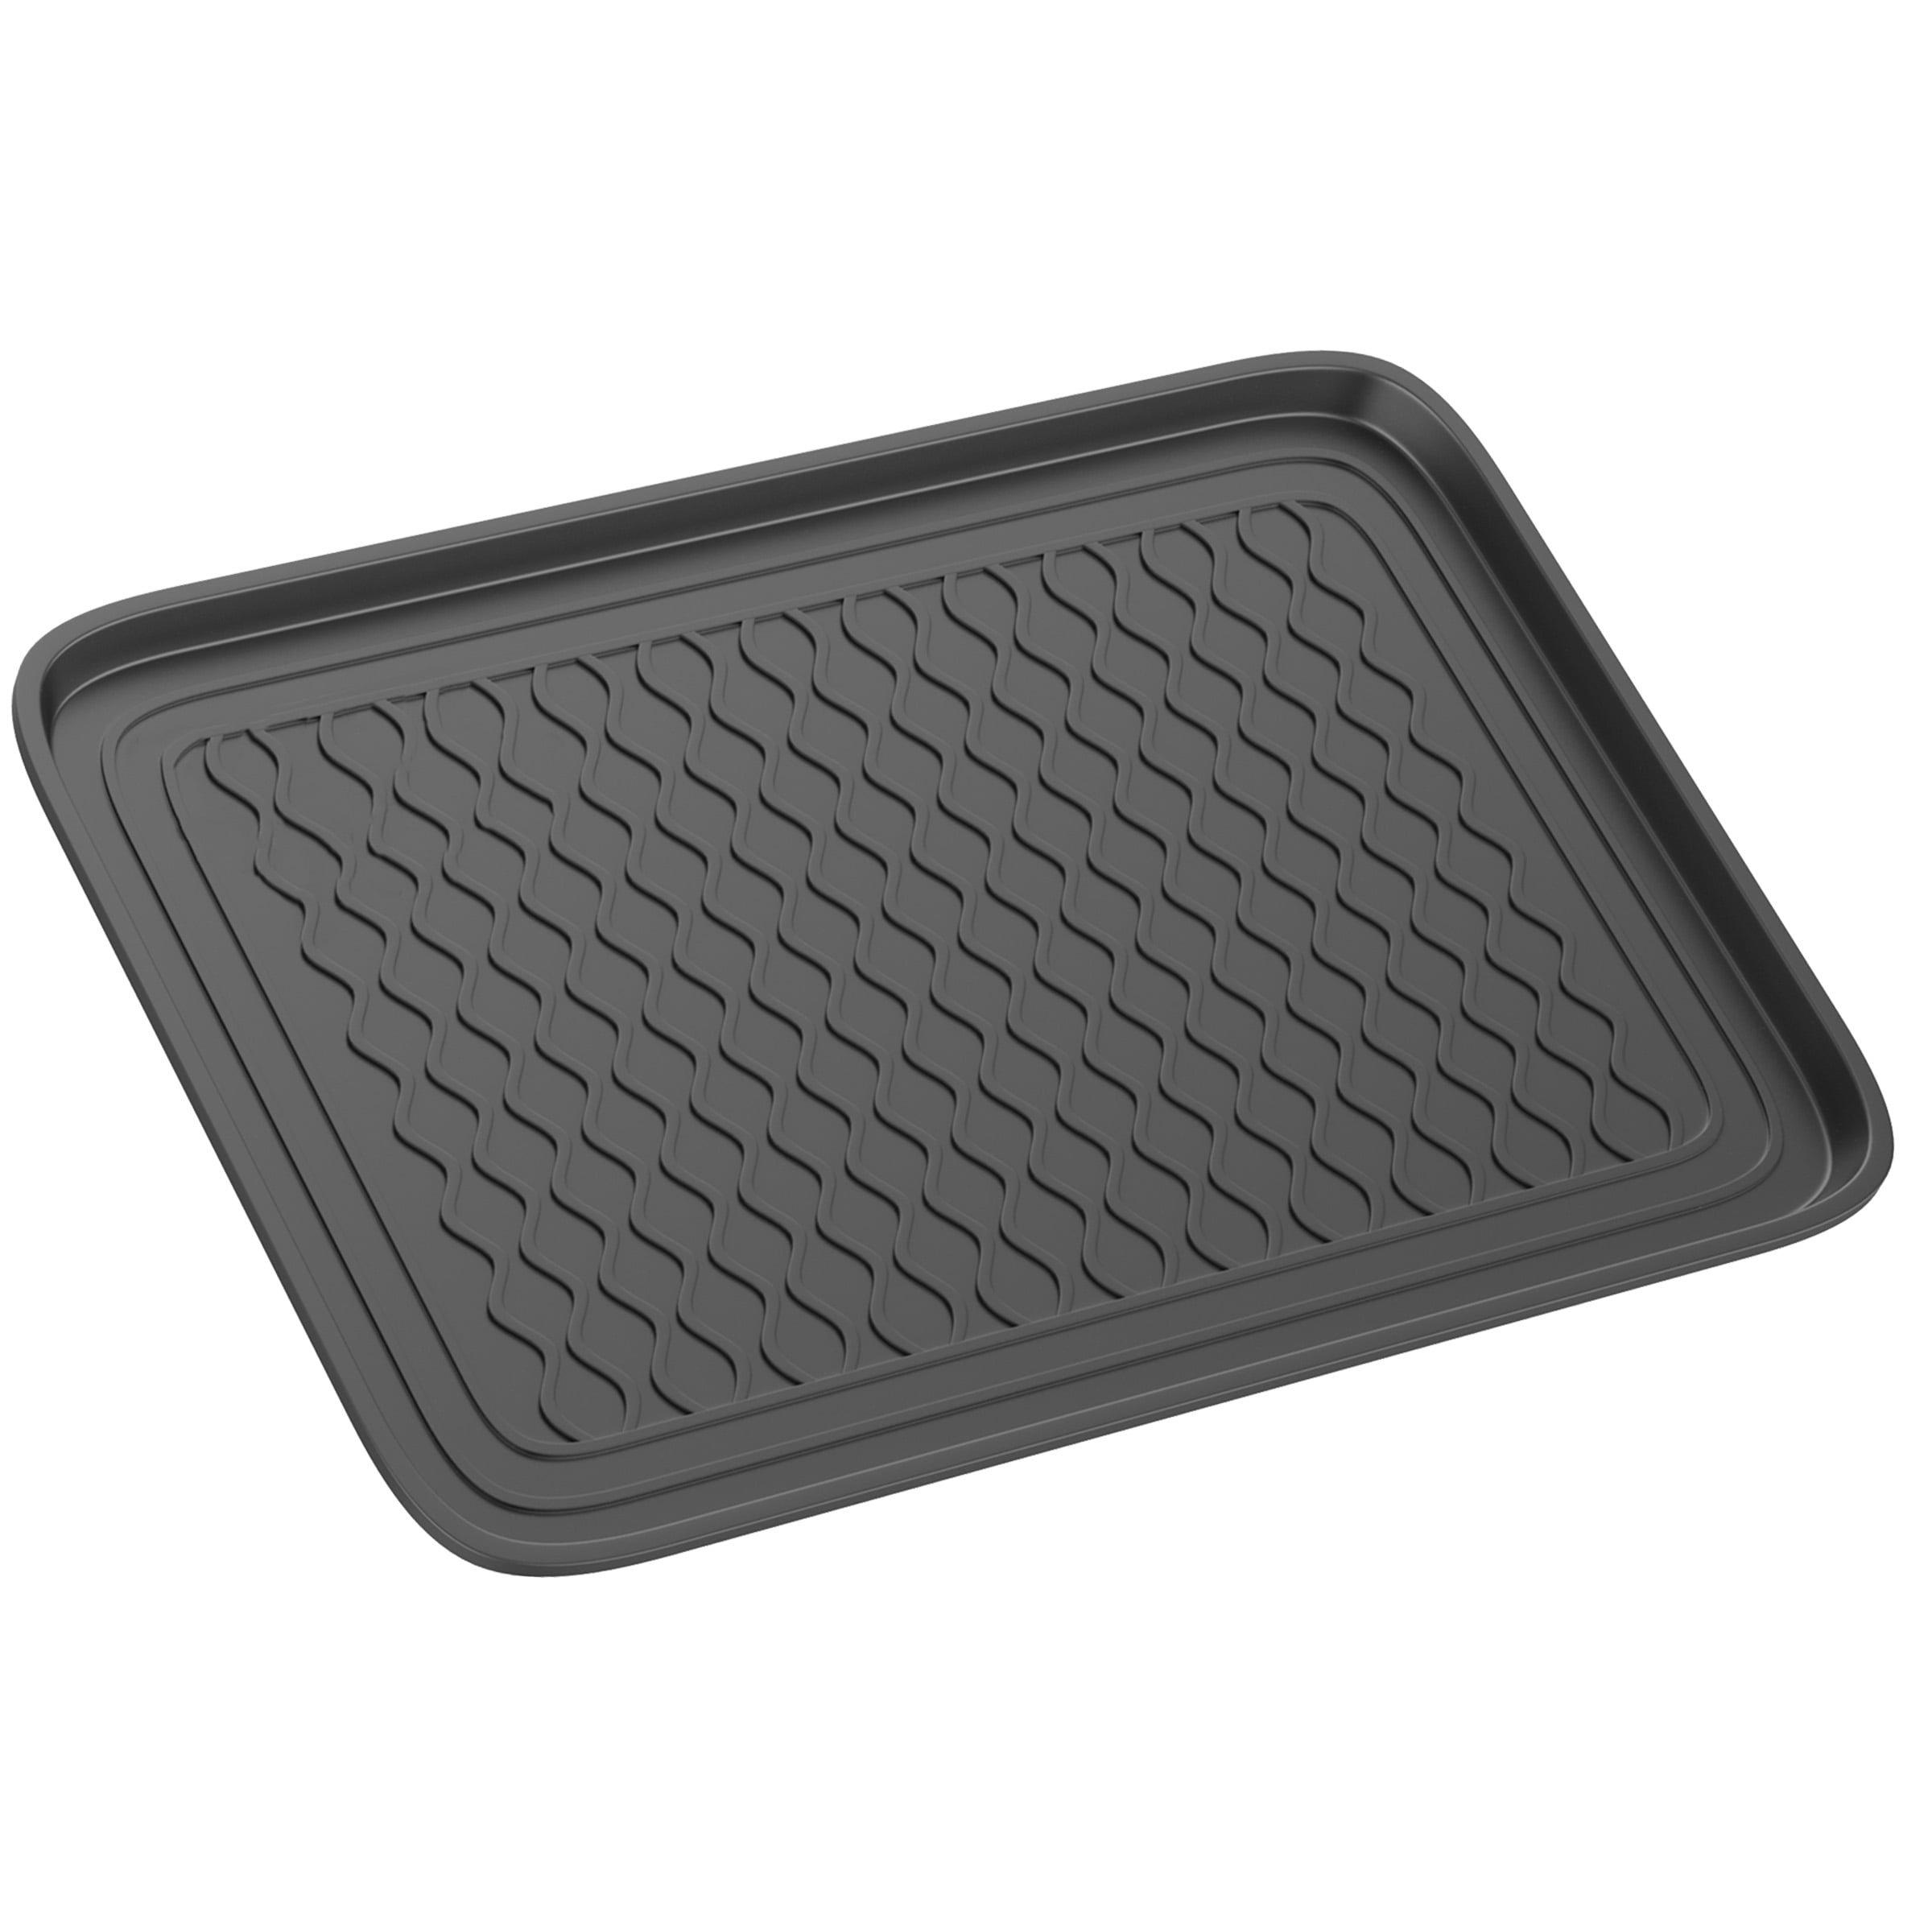 All Weather Boot Tray – Set of 2 Large Water-Resistant Plastic Utility Shoe  Mat for Indoor and Outdoor Use in All Seasons by Stalwart (Black)